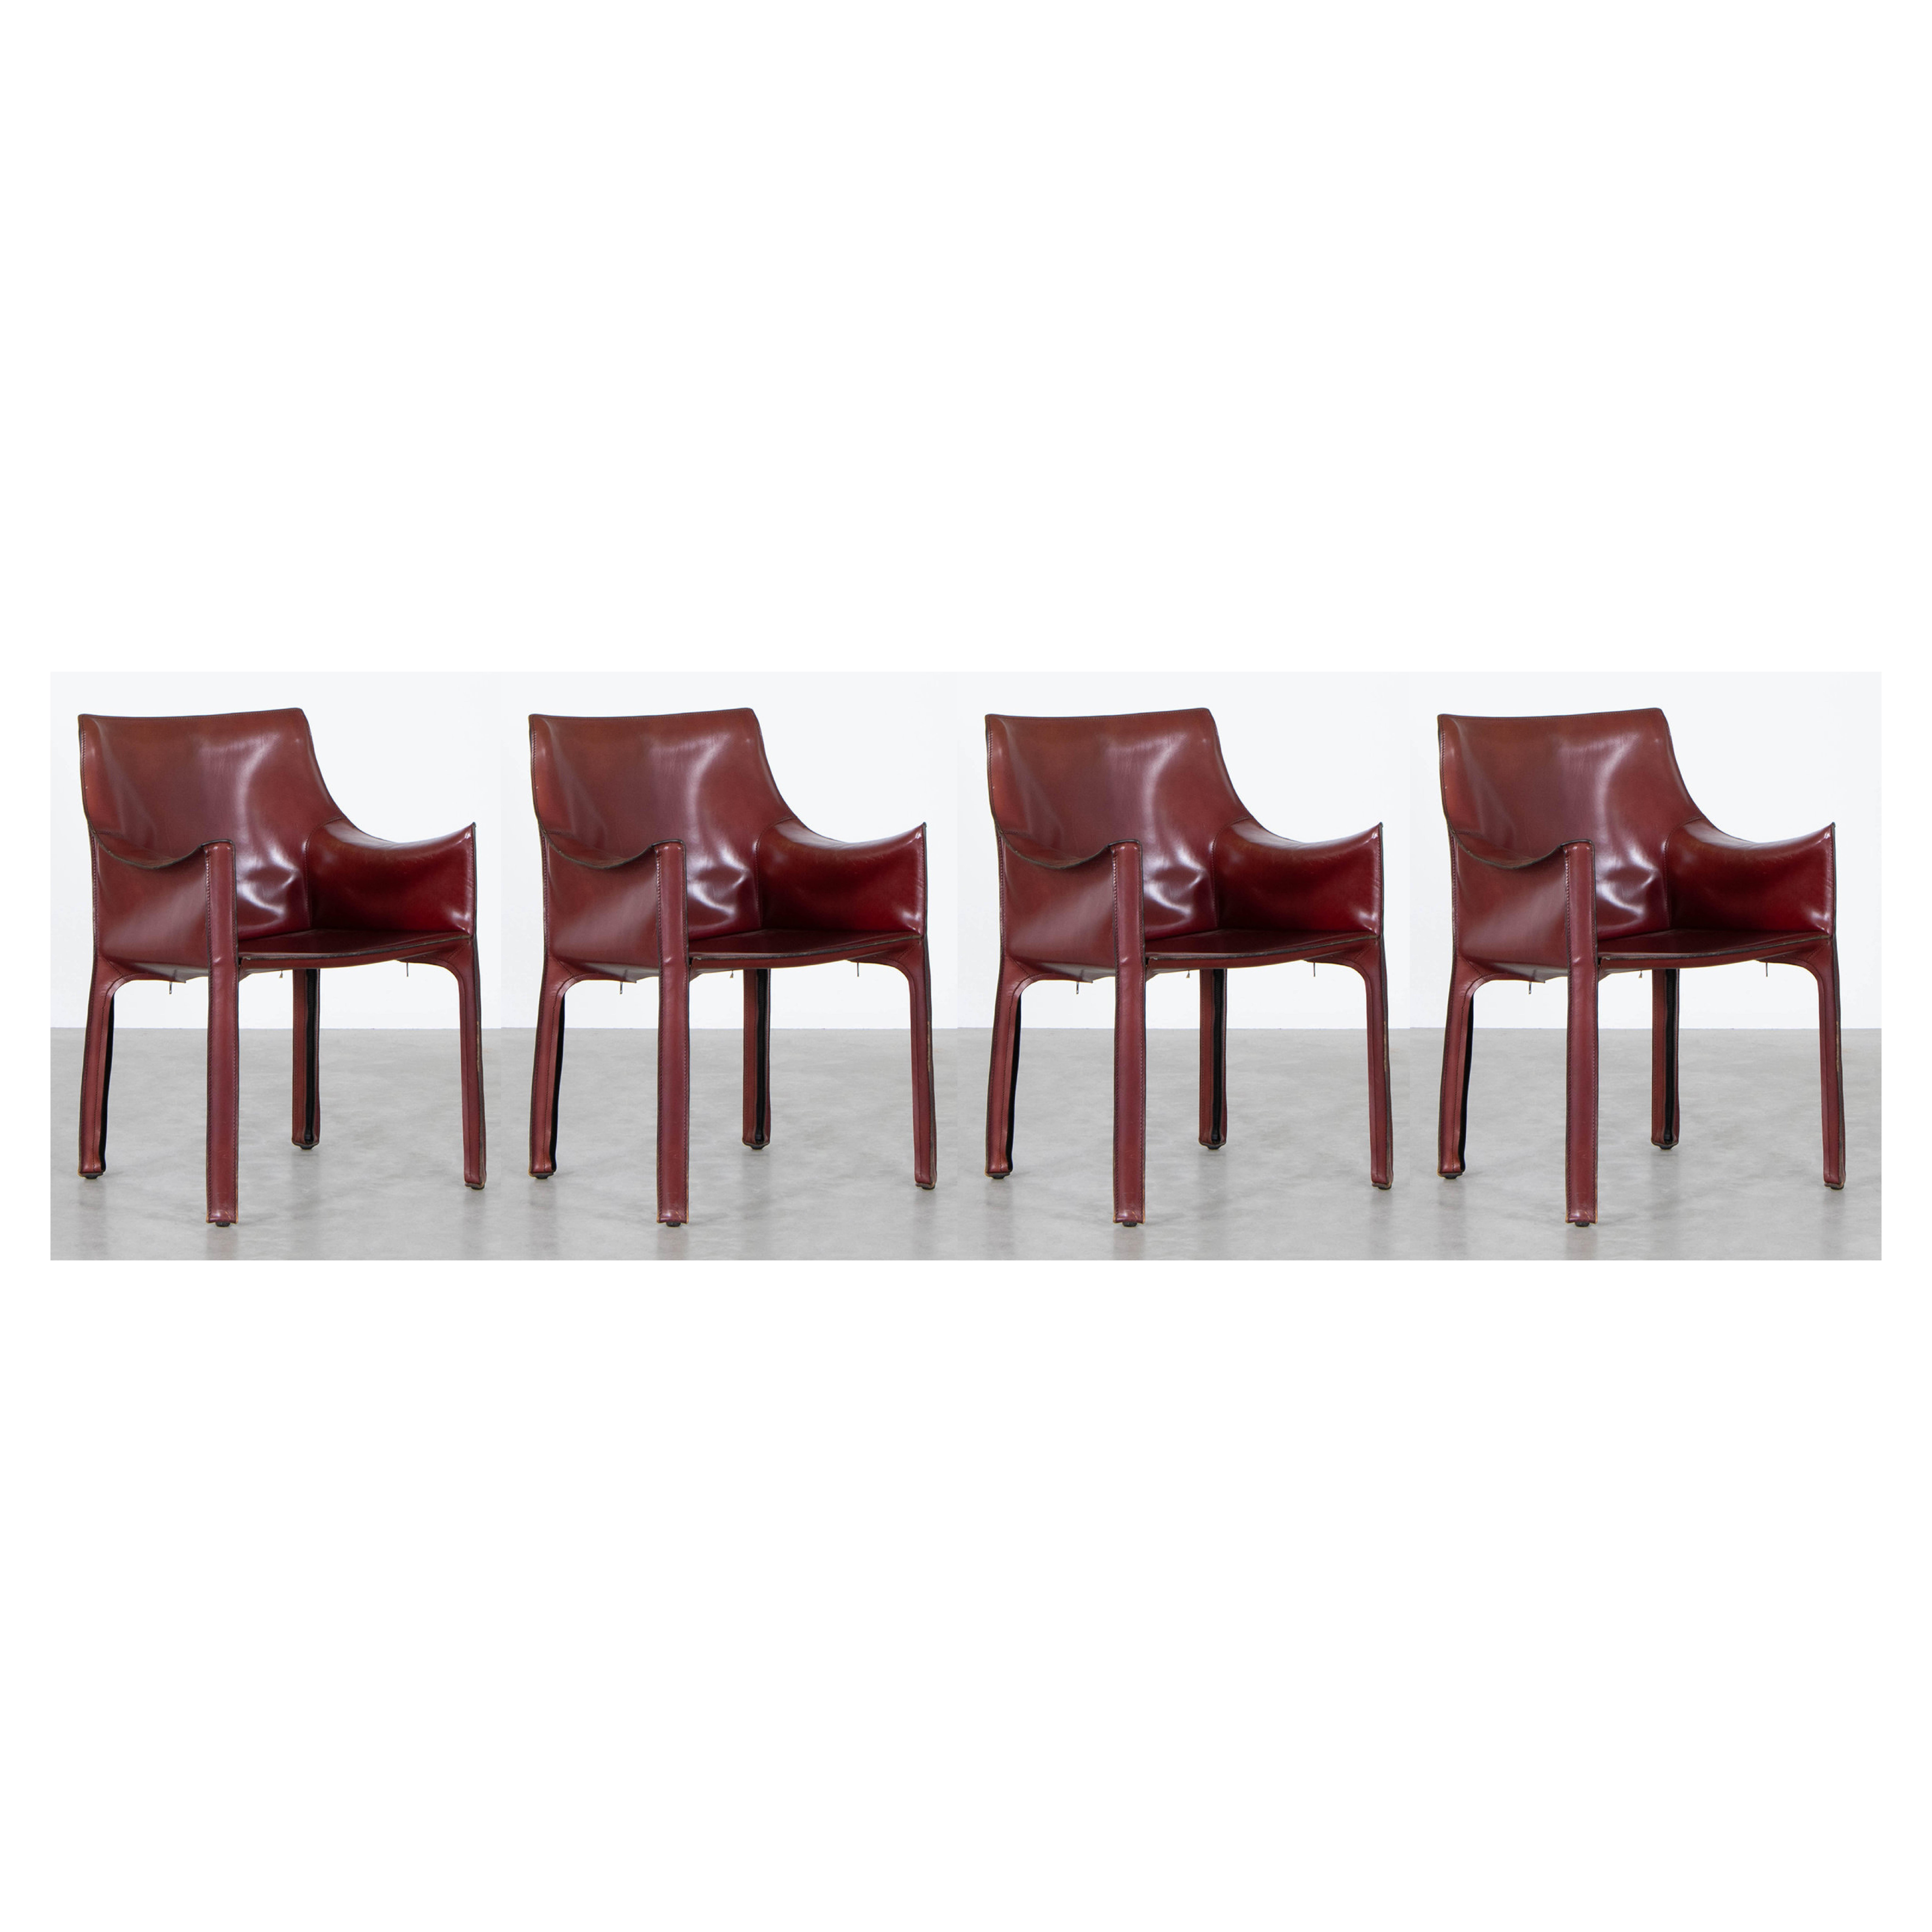 Mario Bellini "CAB 413" Chairs for Cassina in Bordeaux, 1977, Set of 4 For Sale